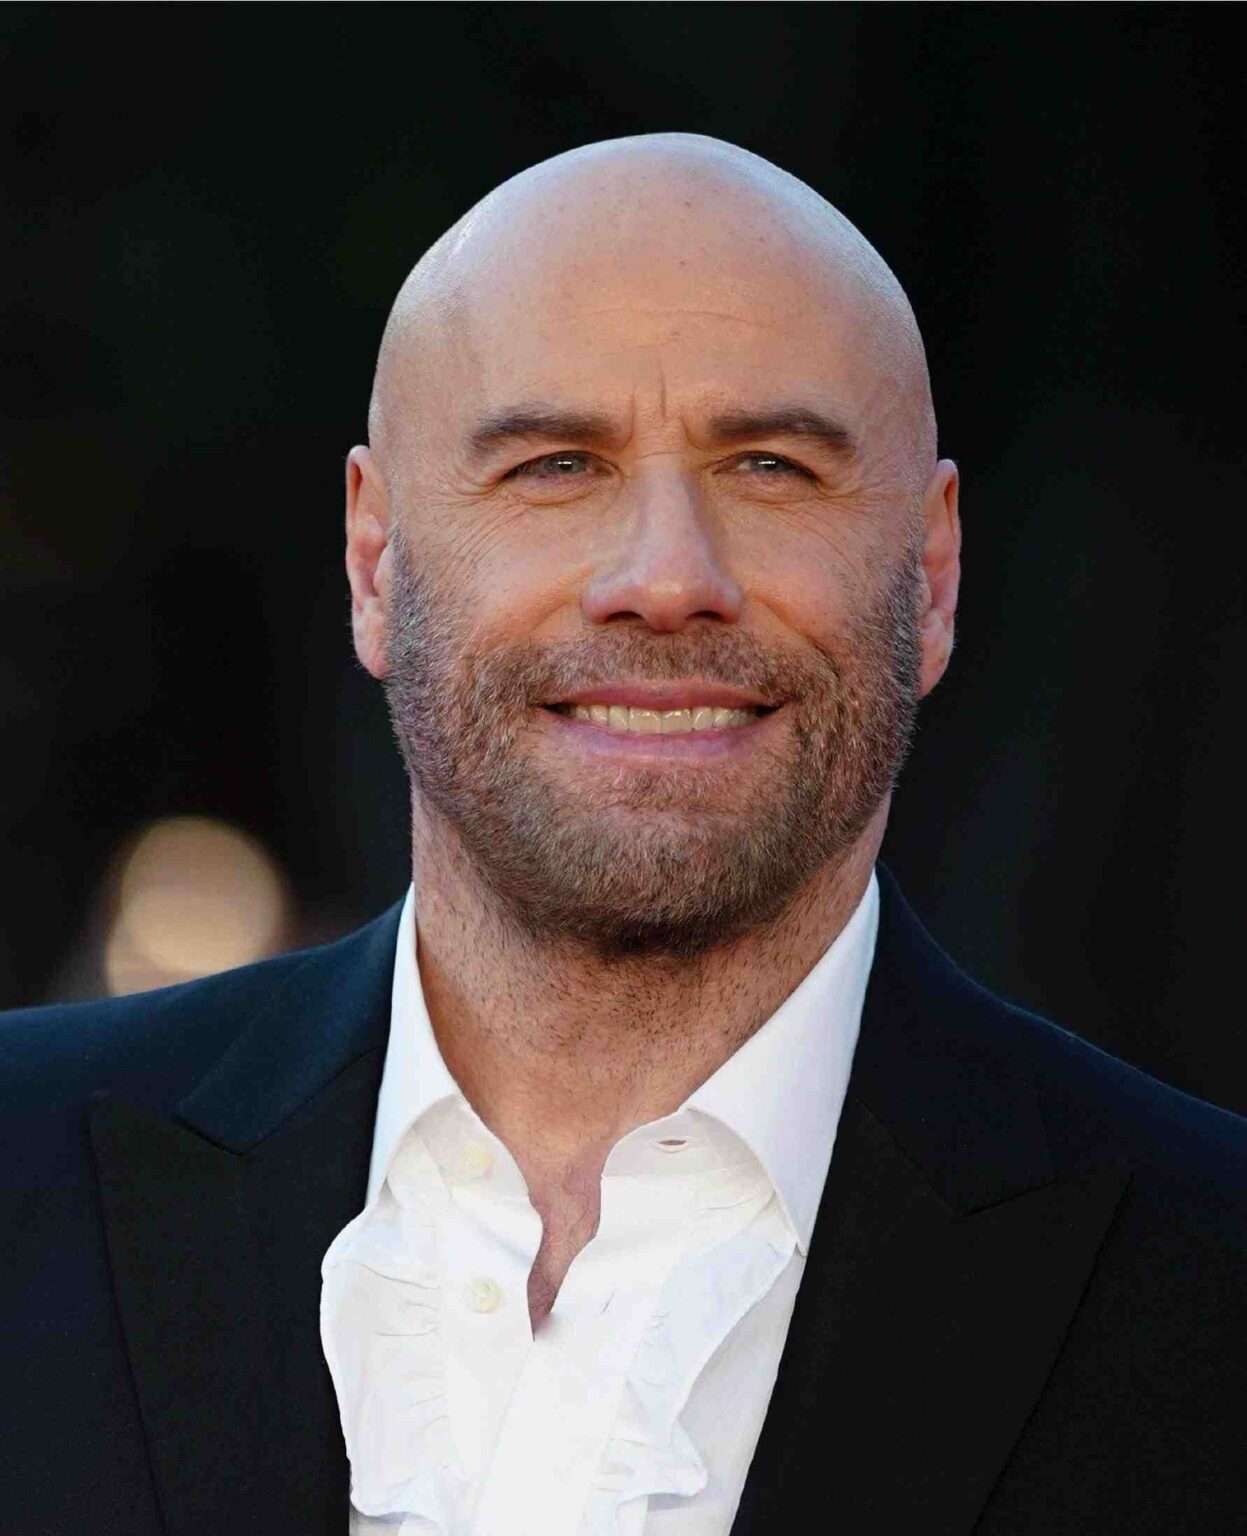 From A-list to C-movies: Dive into the curious case of John Travolta's silver screen adventures. Might this be a strategic play to pump up his net worth? Read on to unravel!